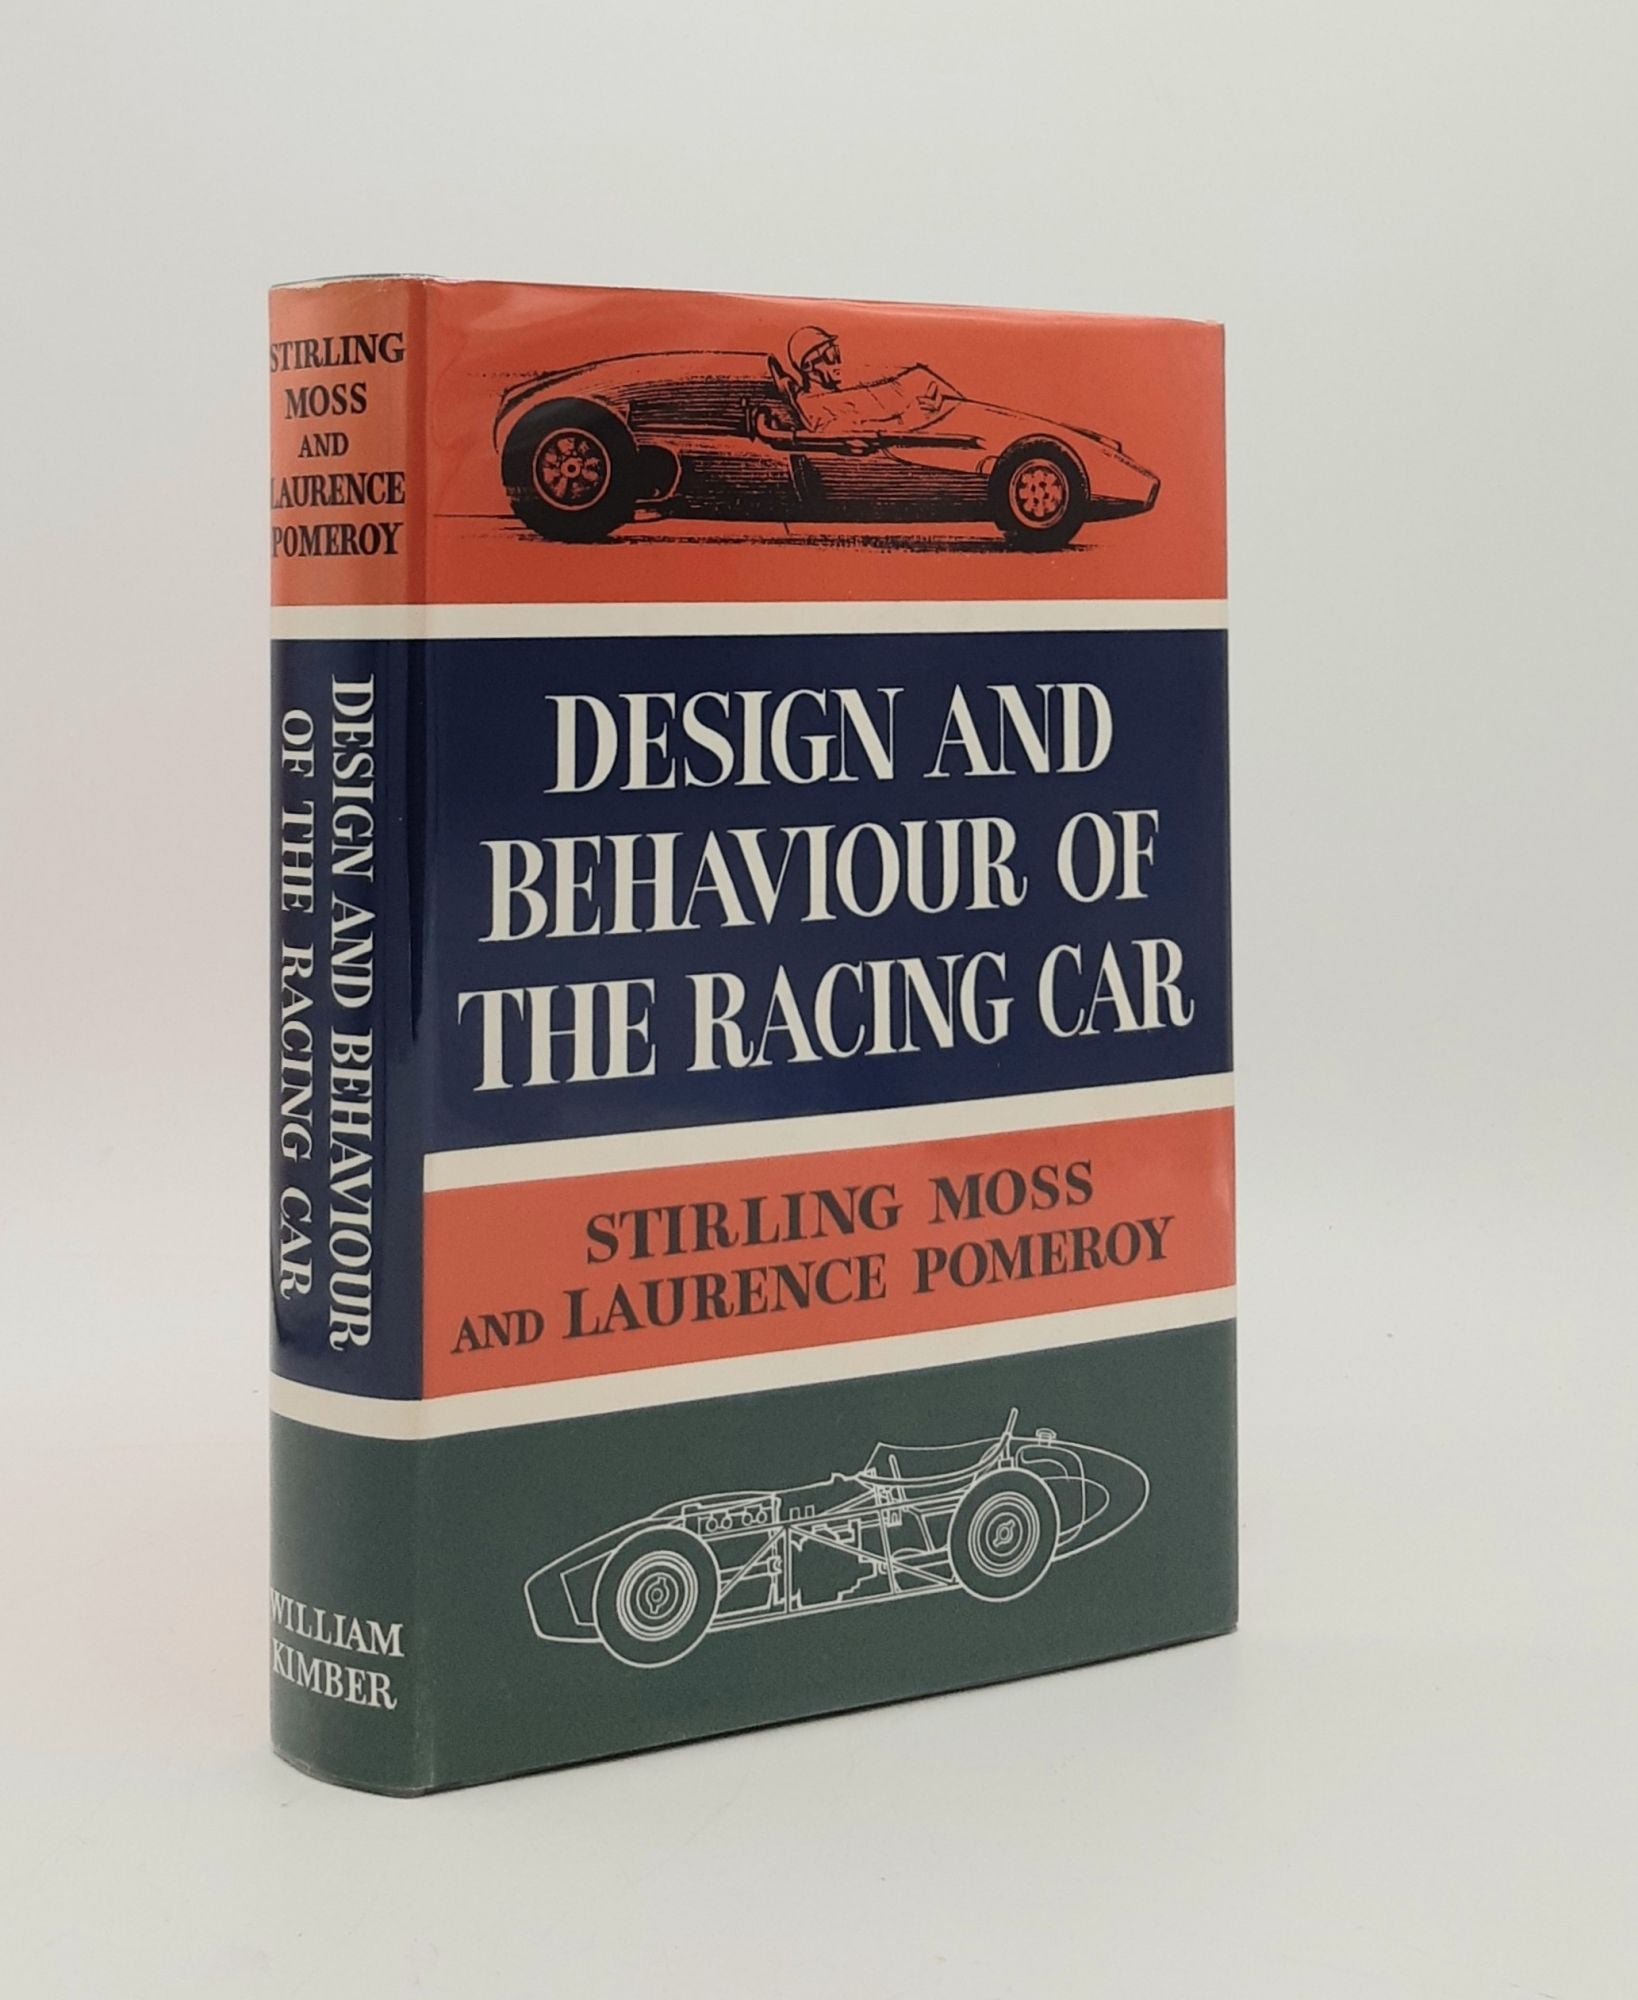 MOSS Stirling, POMEROY Laurence - Design and Behaviour of the Racing Car